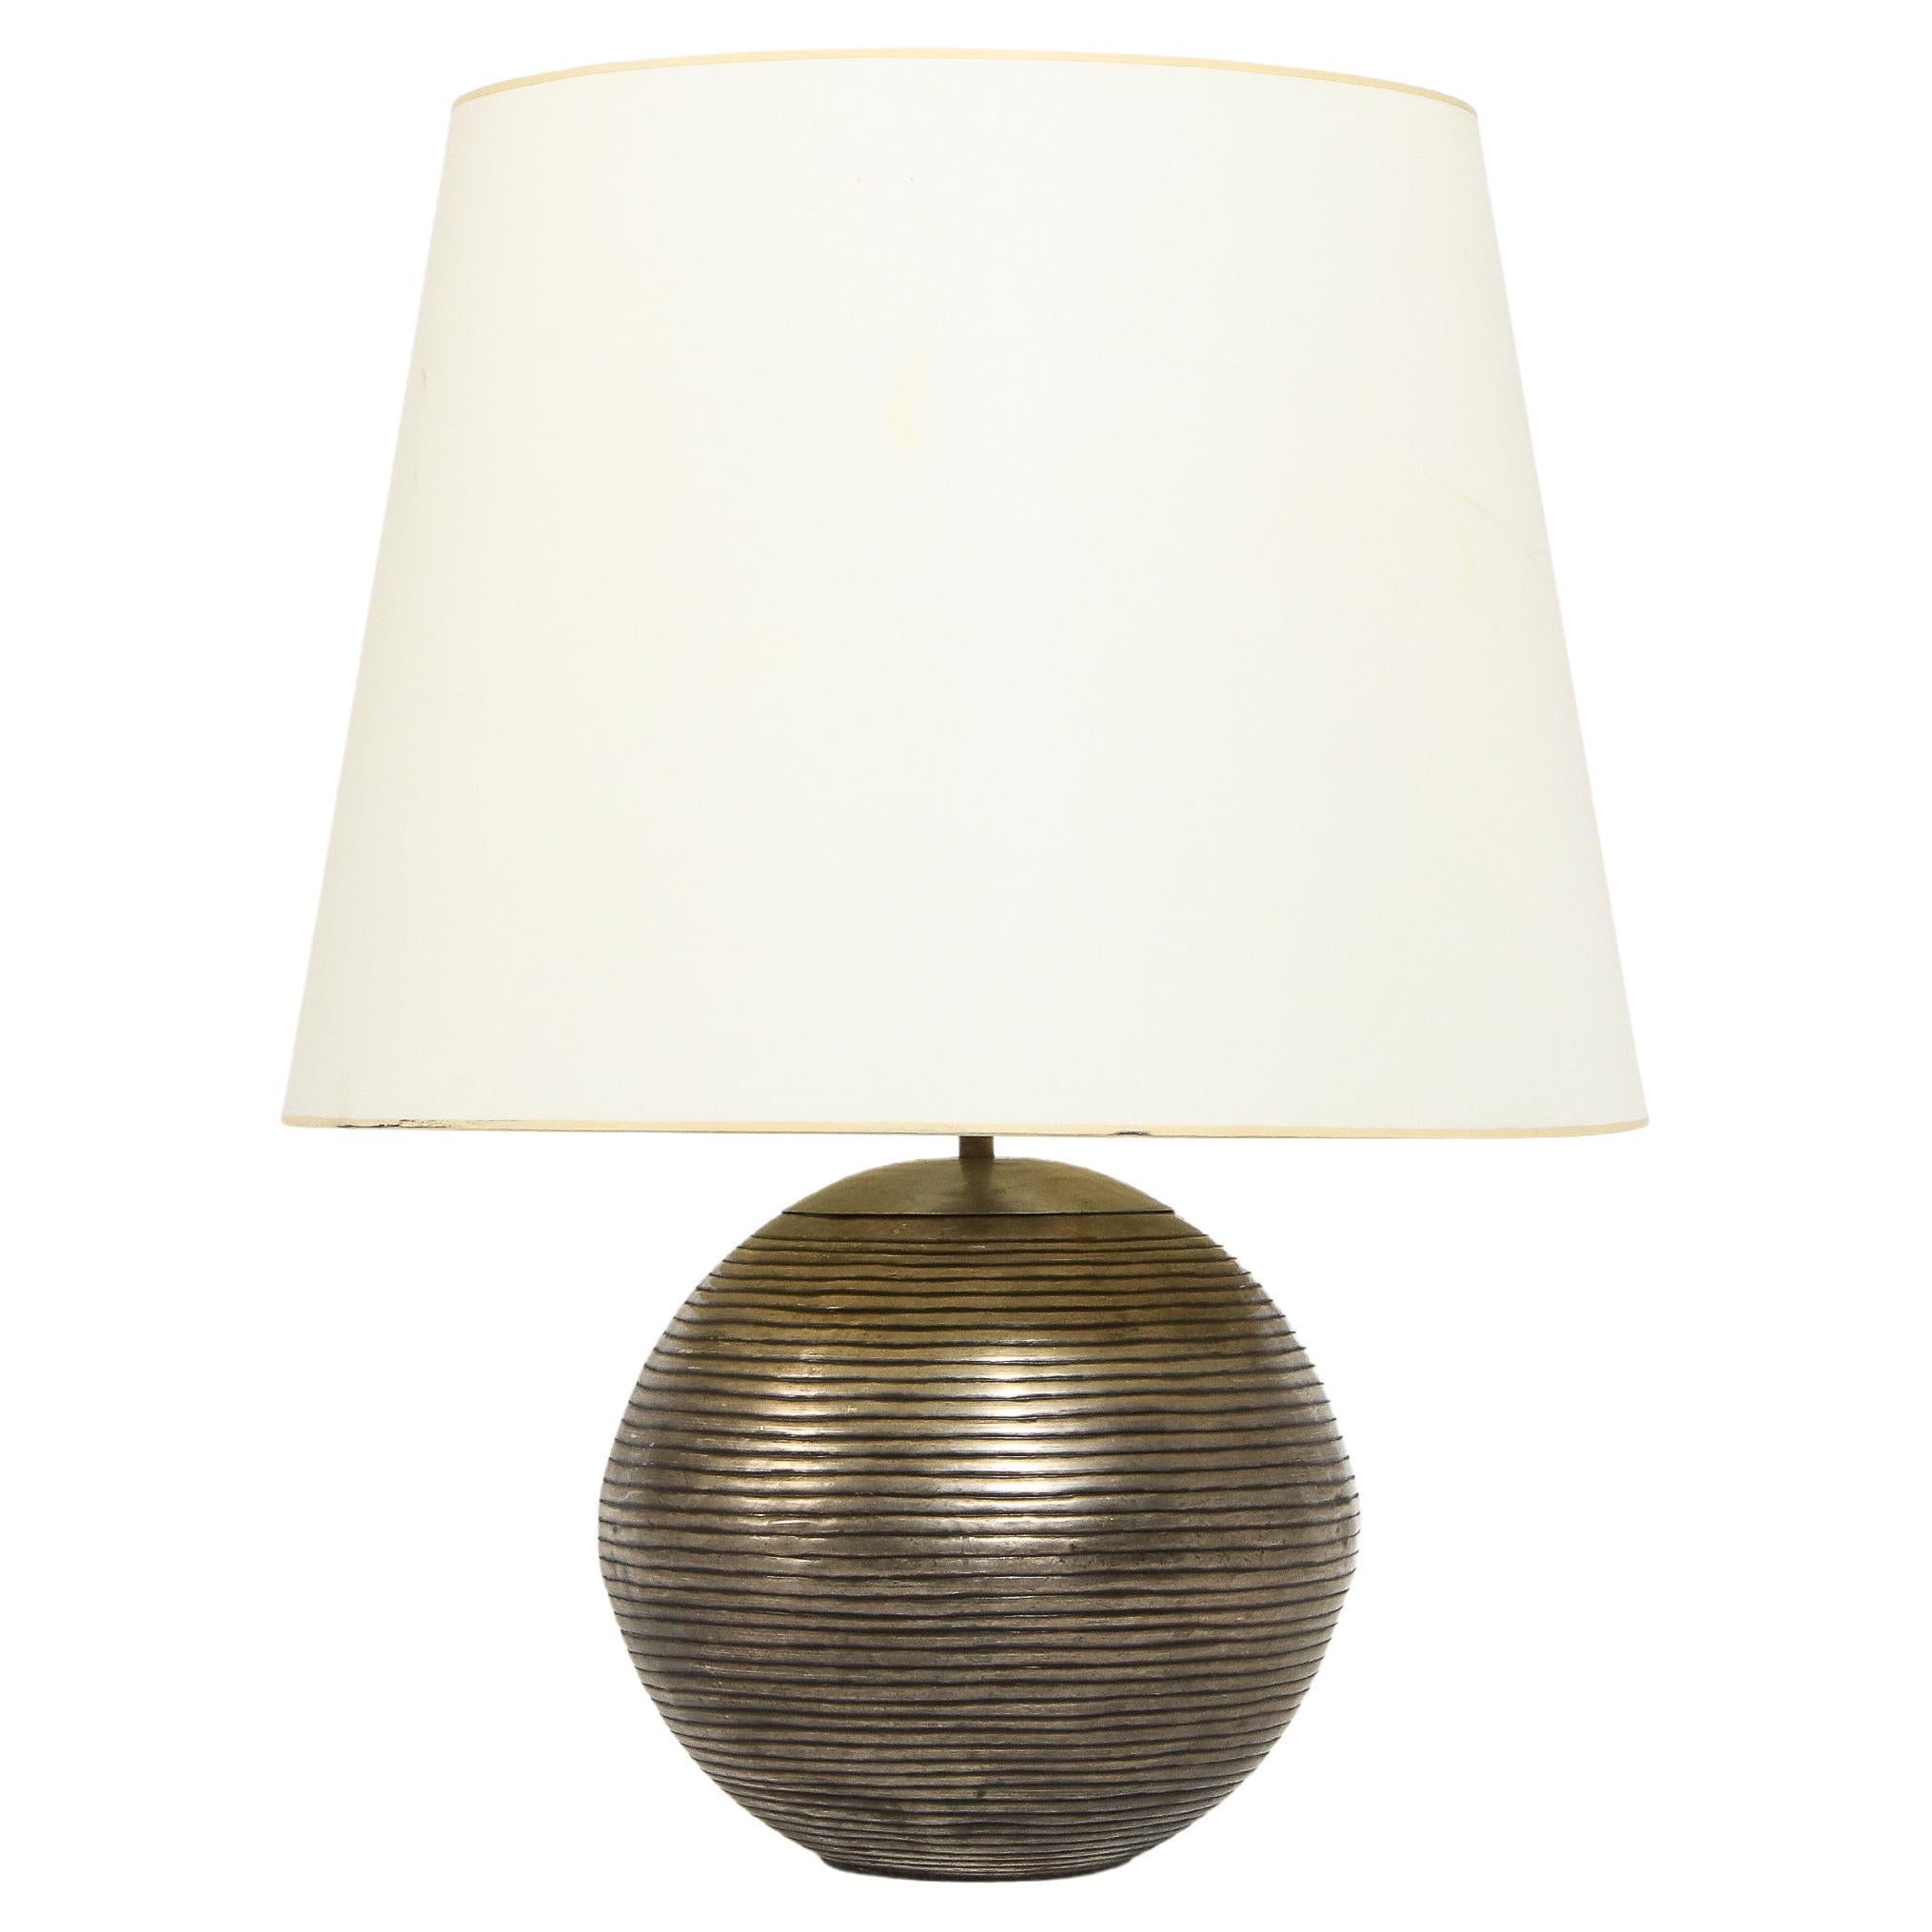 Grooved brass spherical lamp in patinated brass. Shade is for photographic purposes.